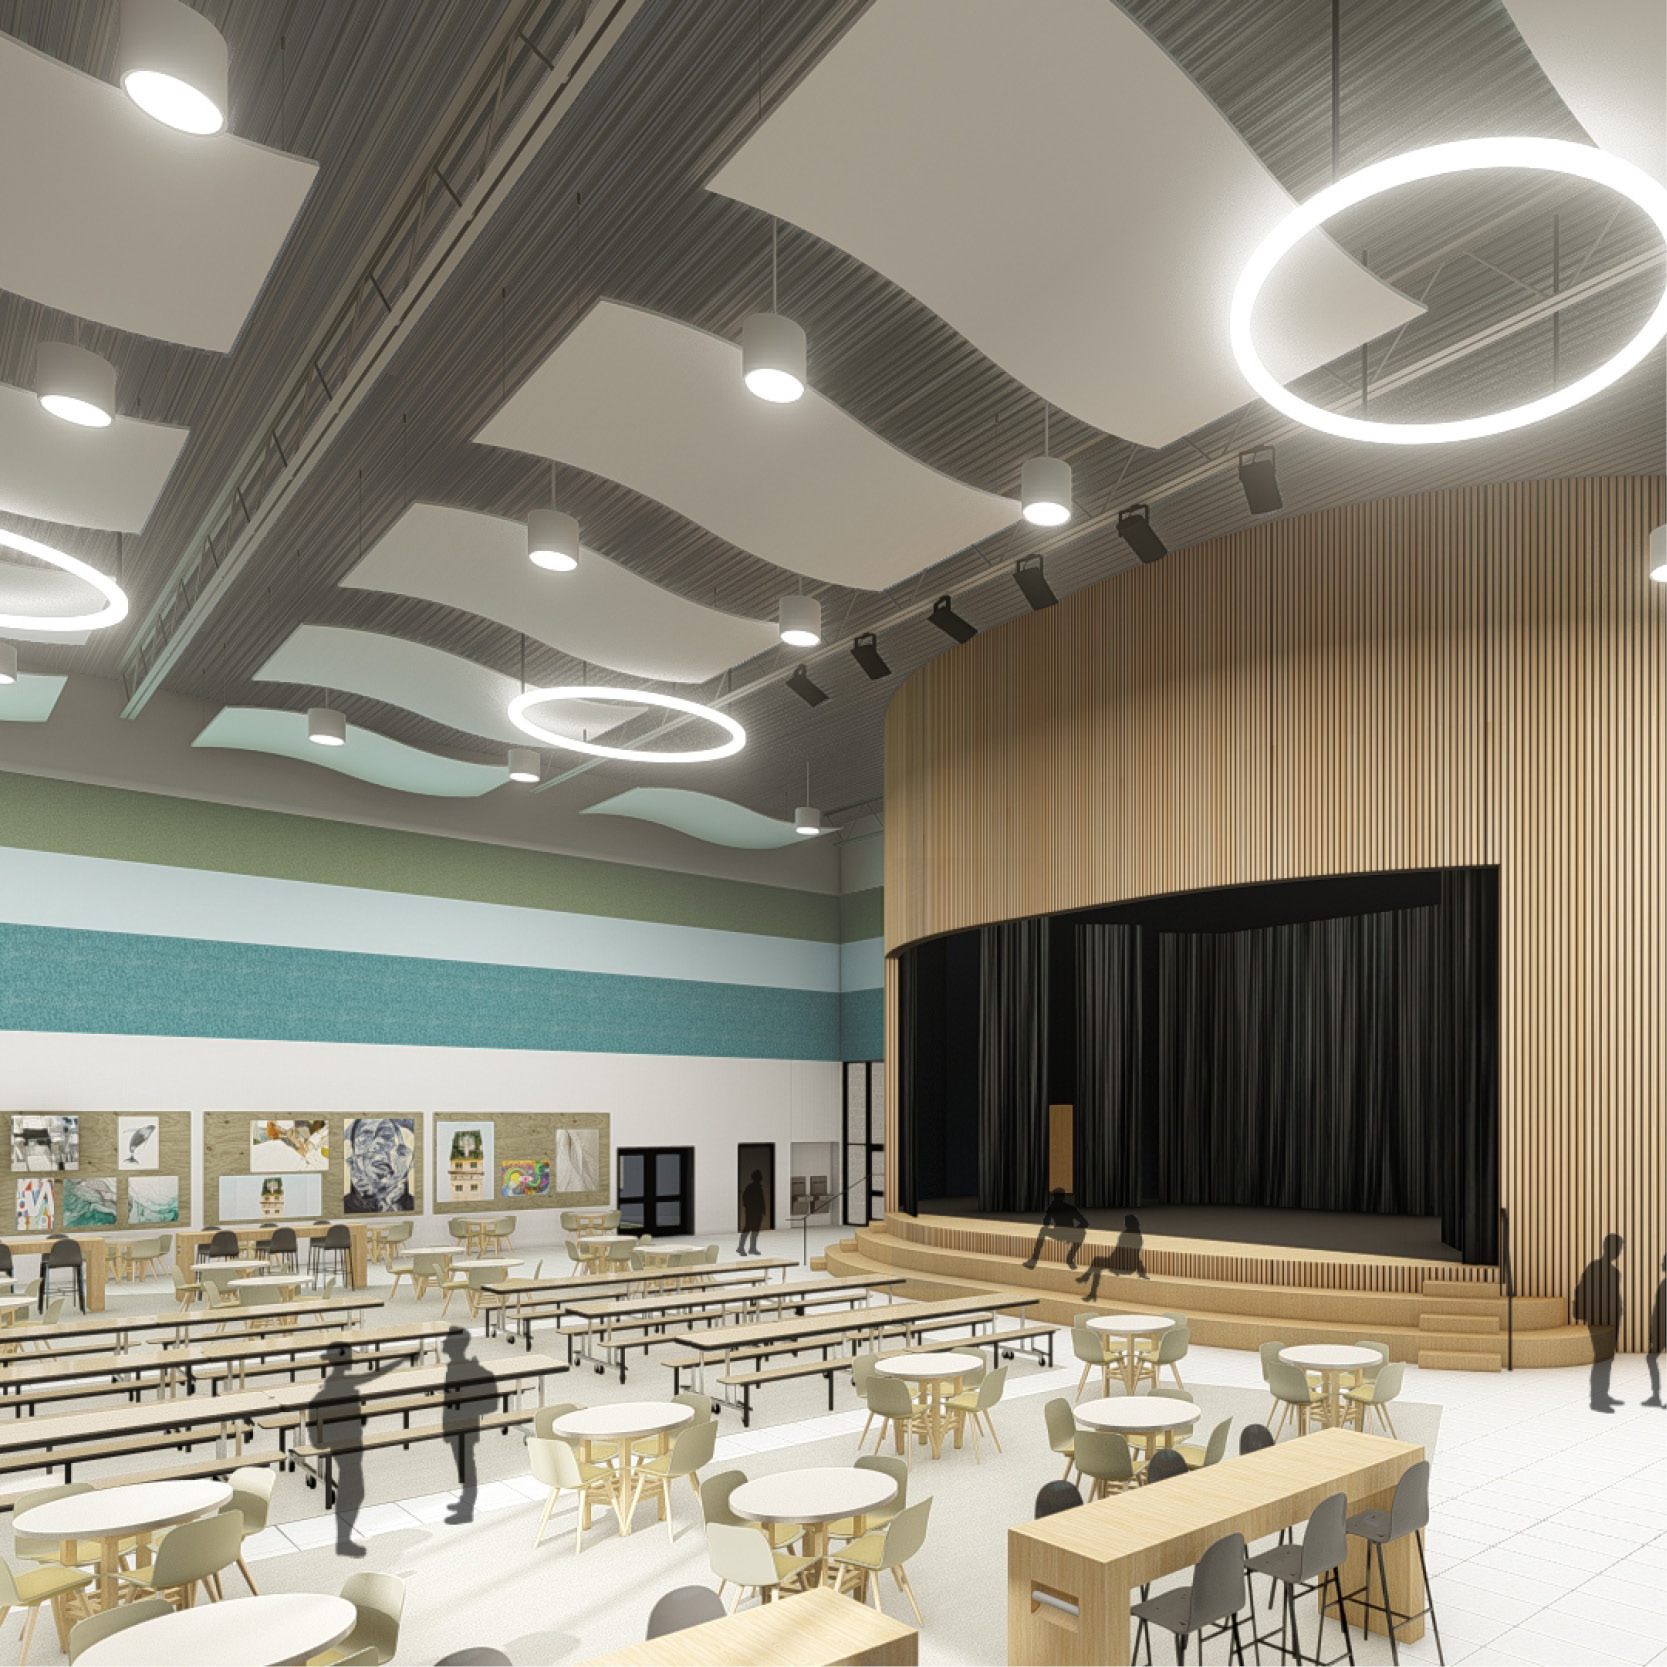 Stratford High School: Shaping the Future of Education and Community